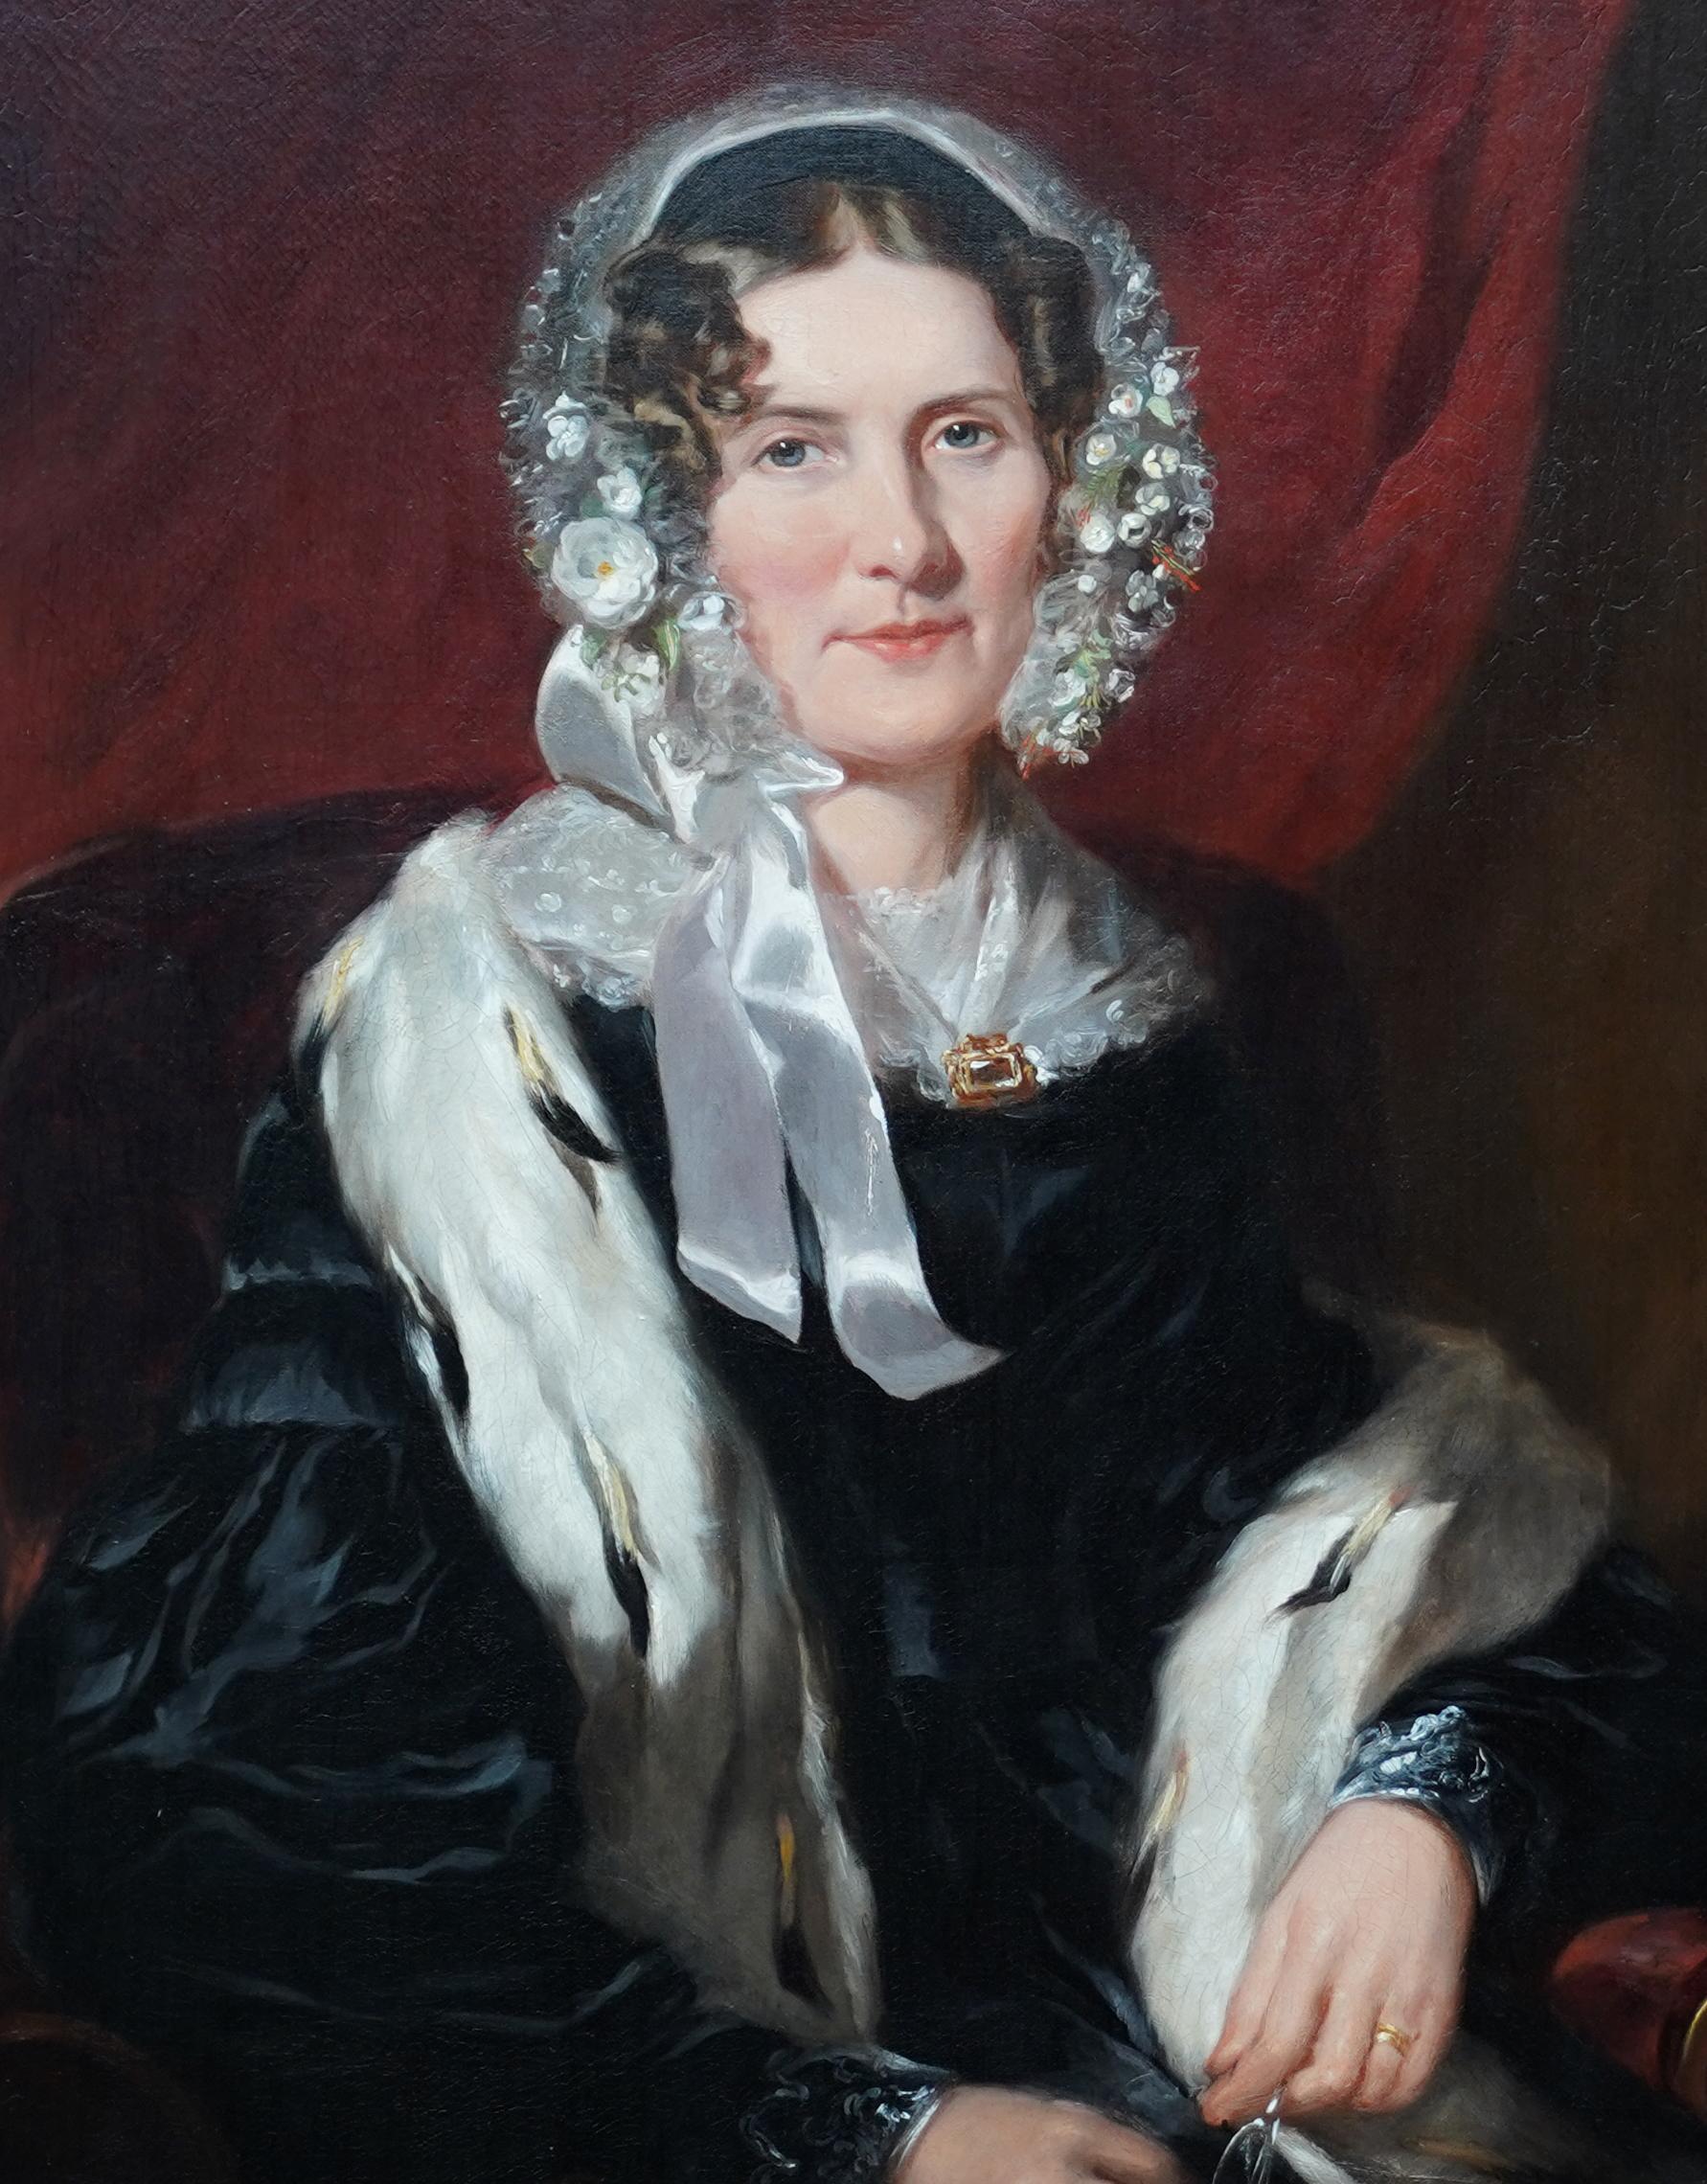 Portrait of Lady in Ermine Stole - British 19th century art female oil painting - Realist Painting by Martin Archer Shee (circle)